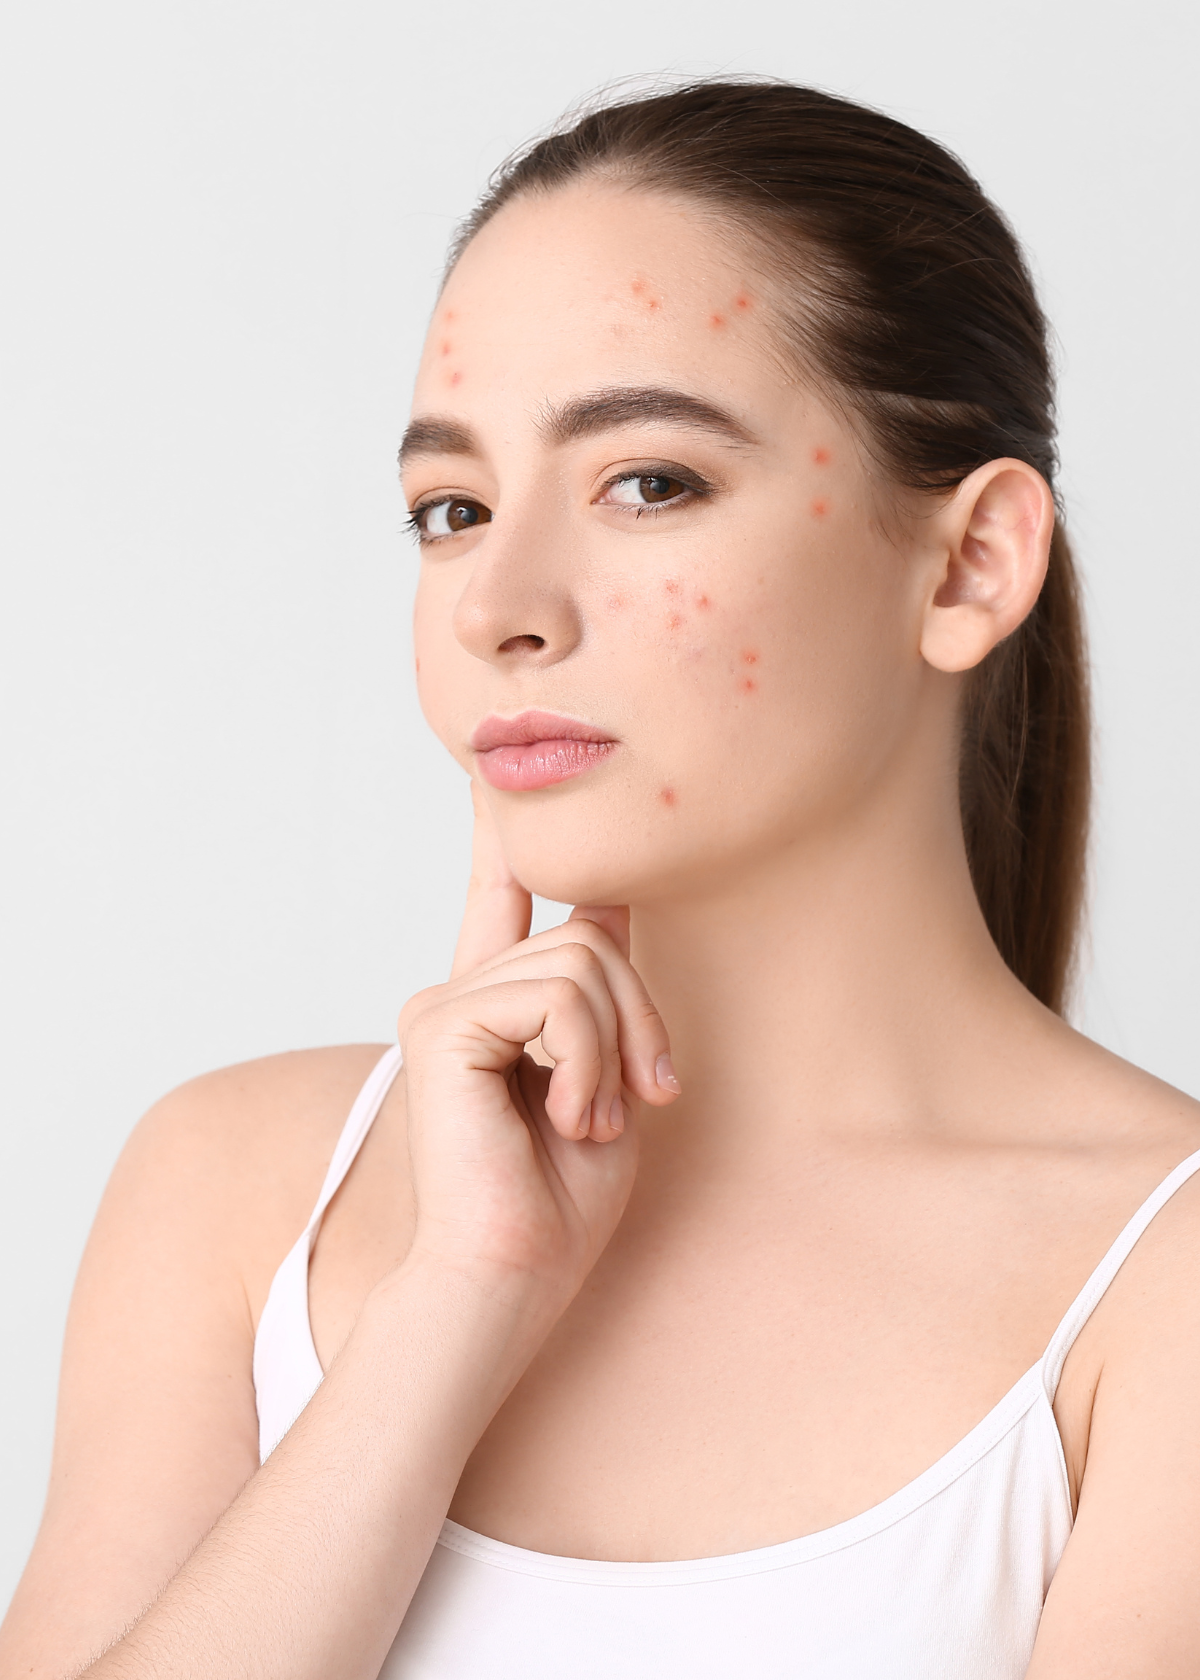 Best Moisturizers for Fungal Acne